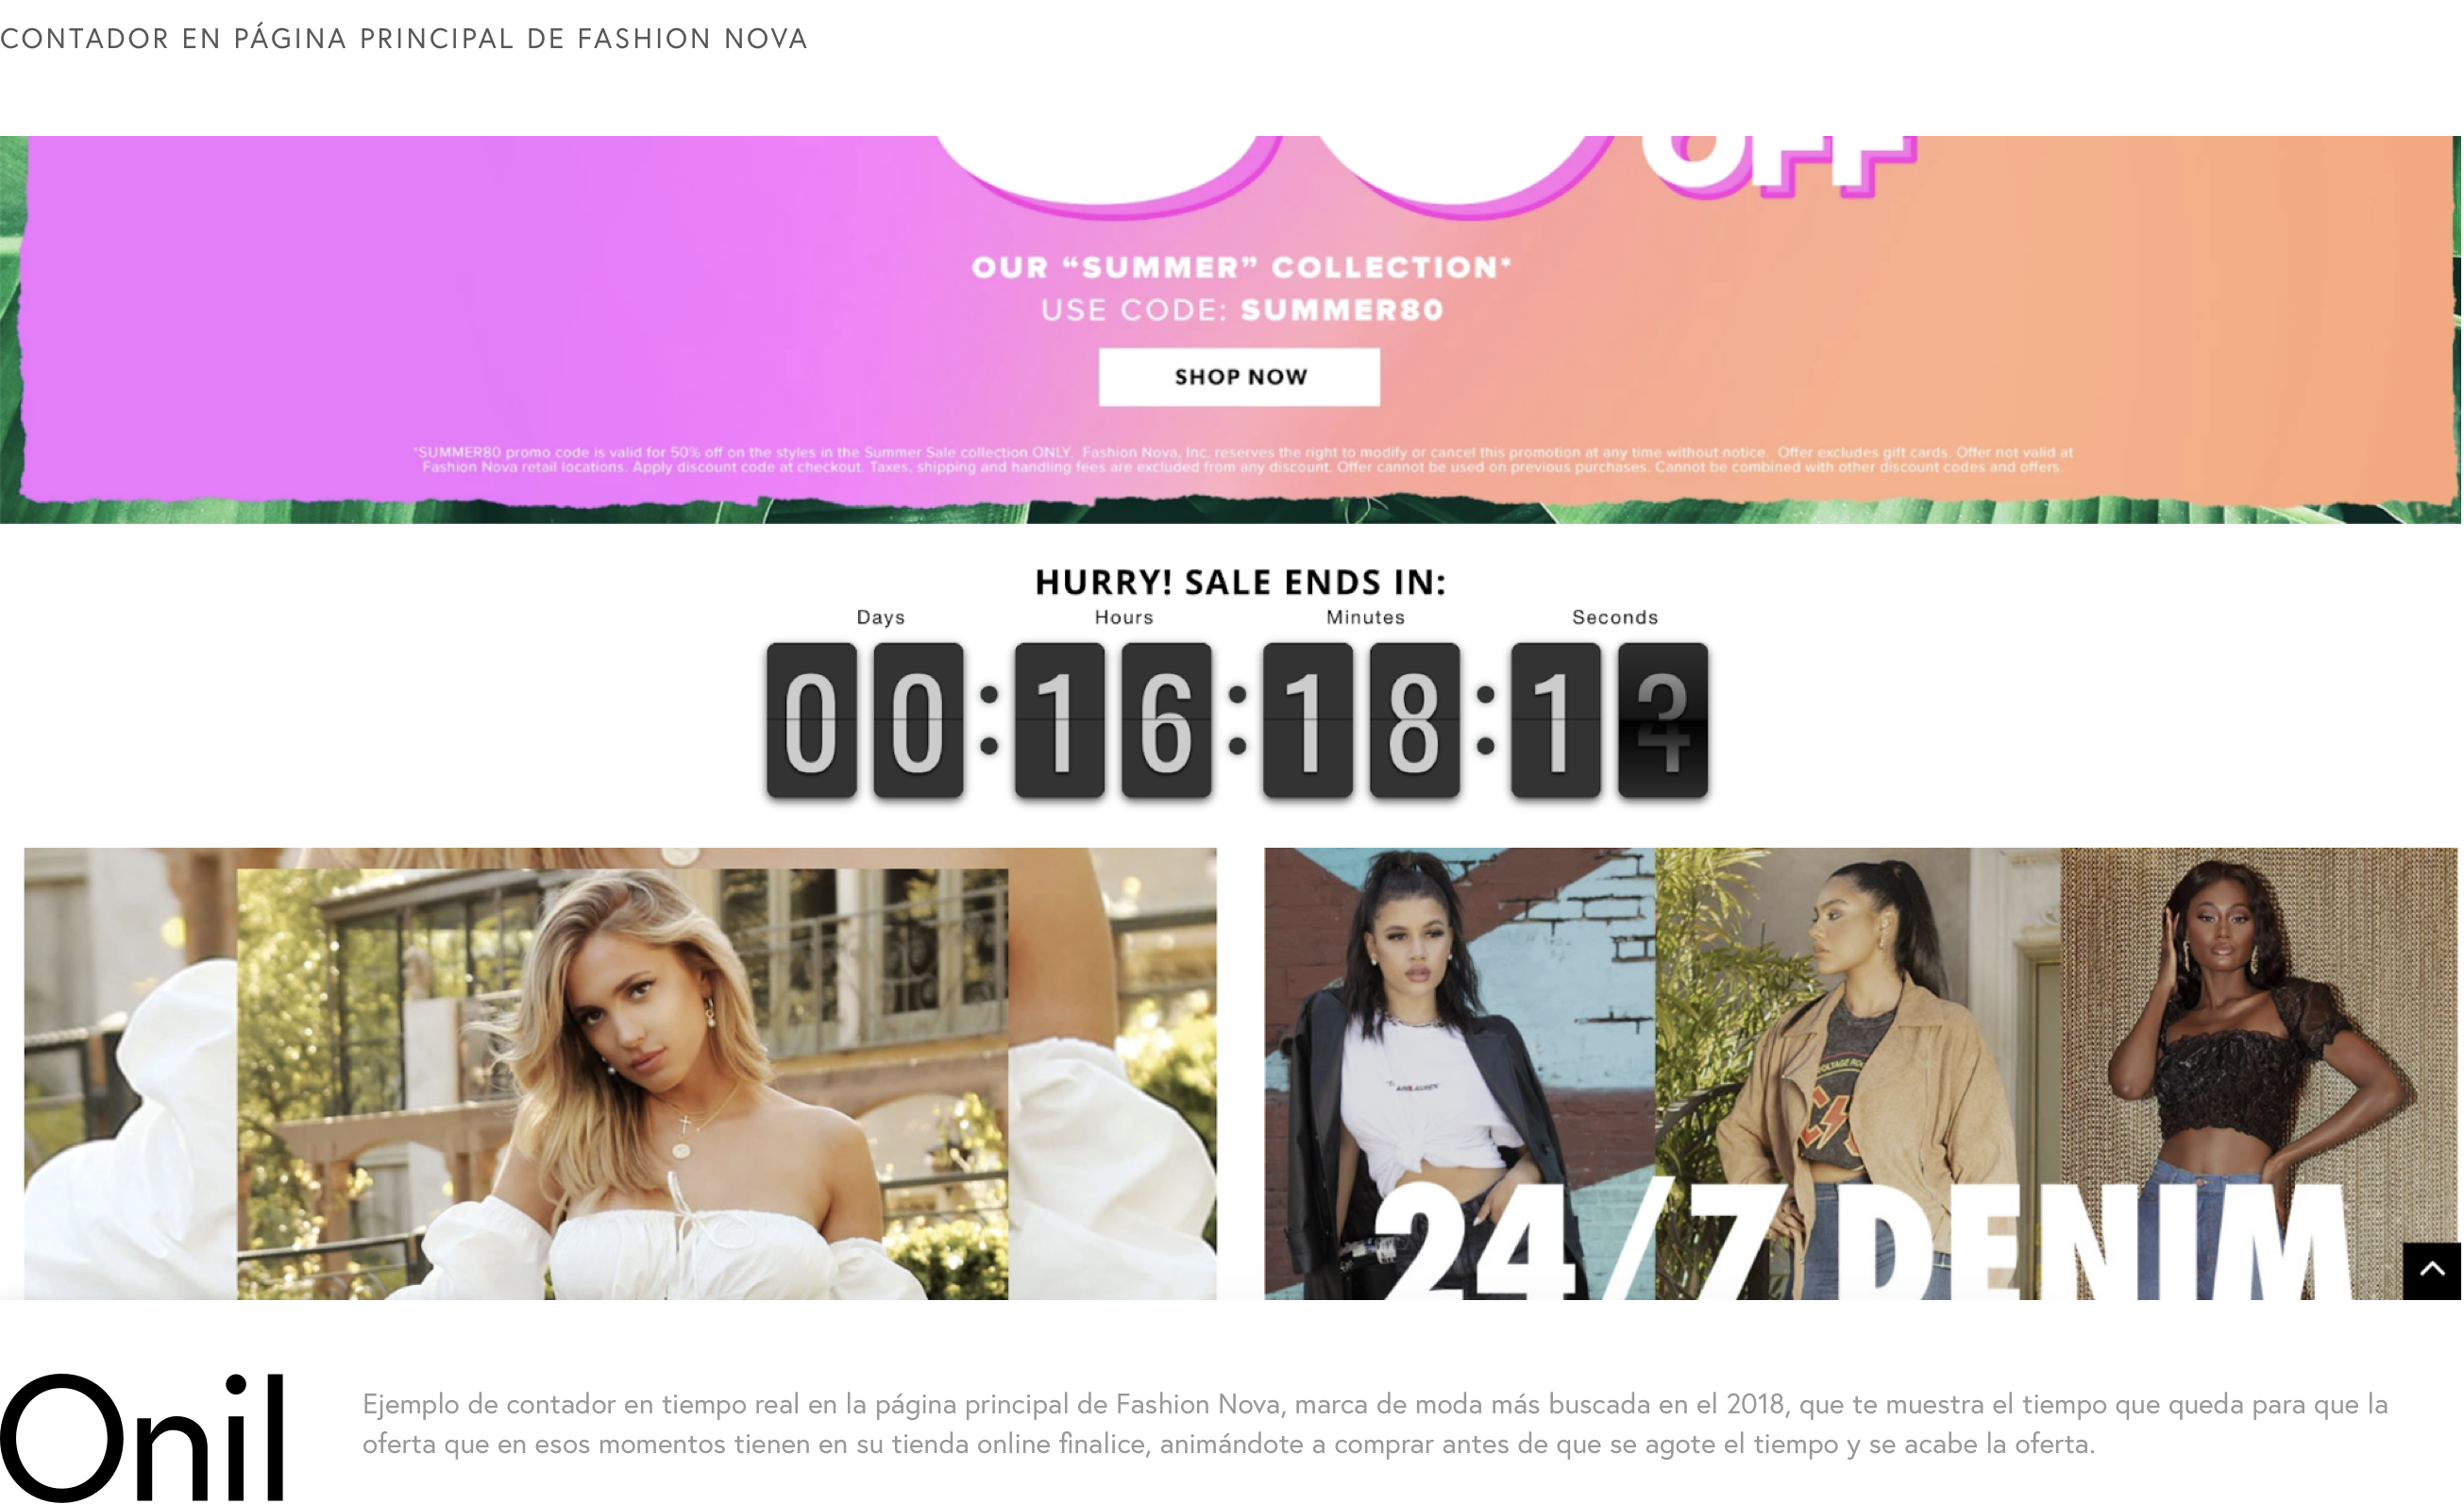 Fashion Nova Home Page Counter - Example of a real-time counter on the Fashion Nova home page, the most searched fashion brand in 2018, showing you the time left until the offer ends.